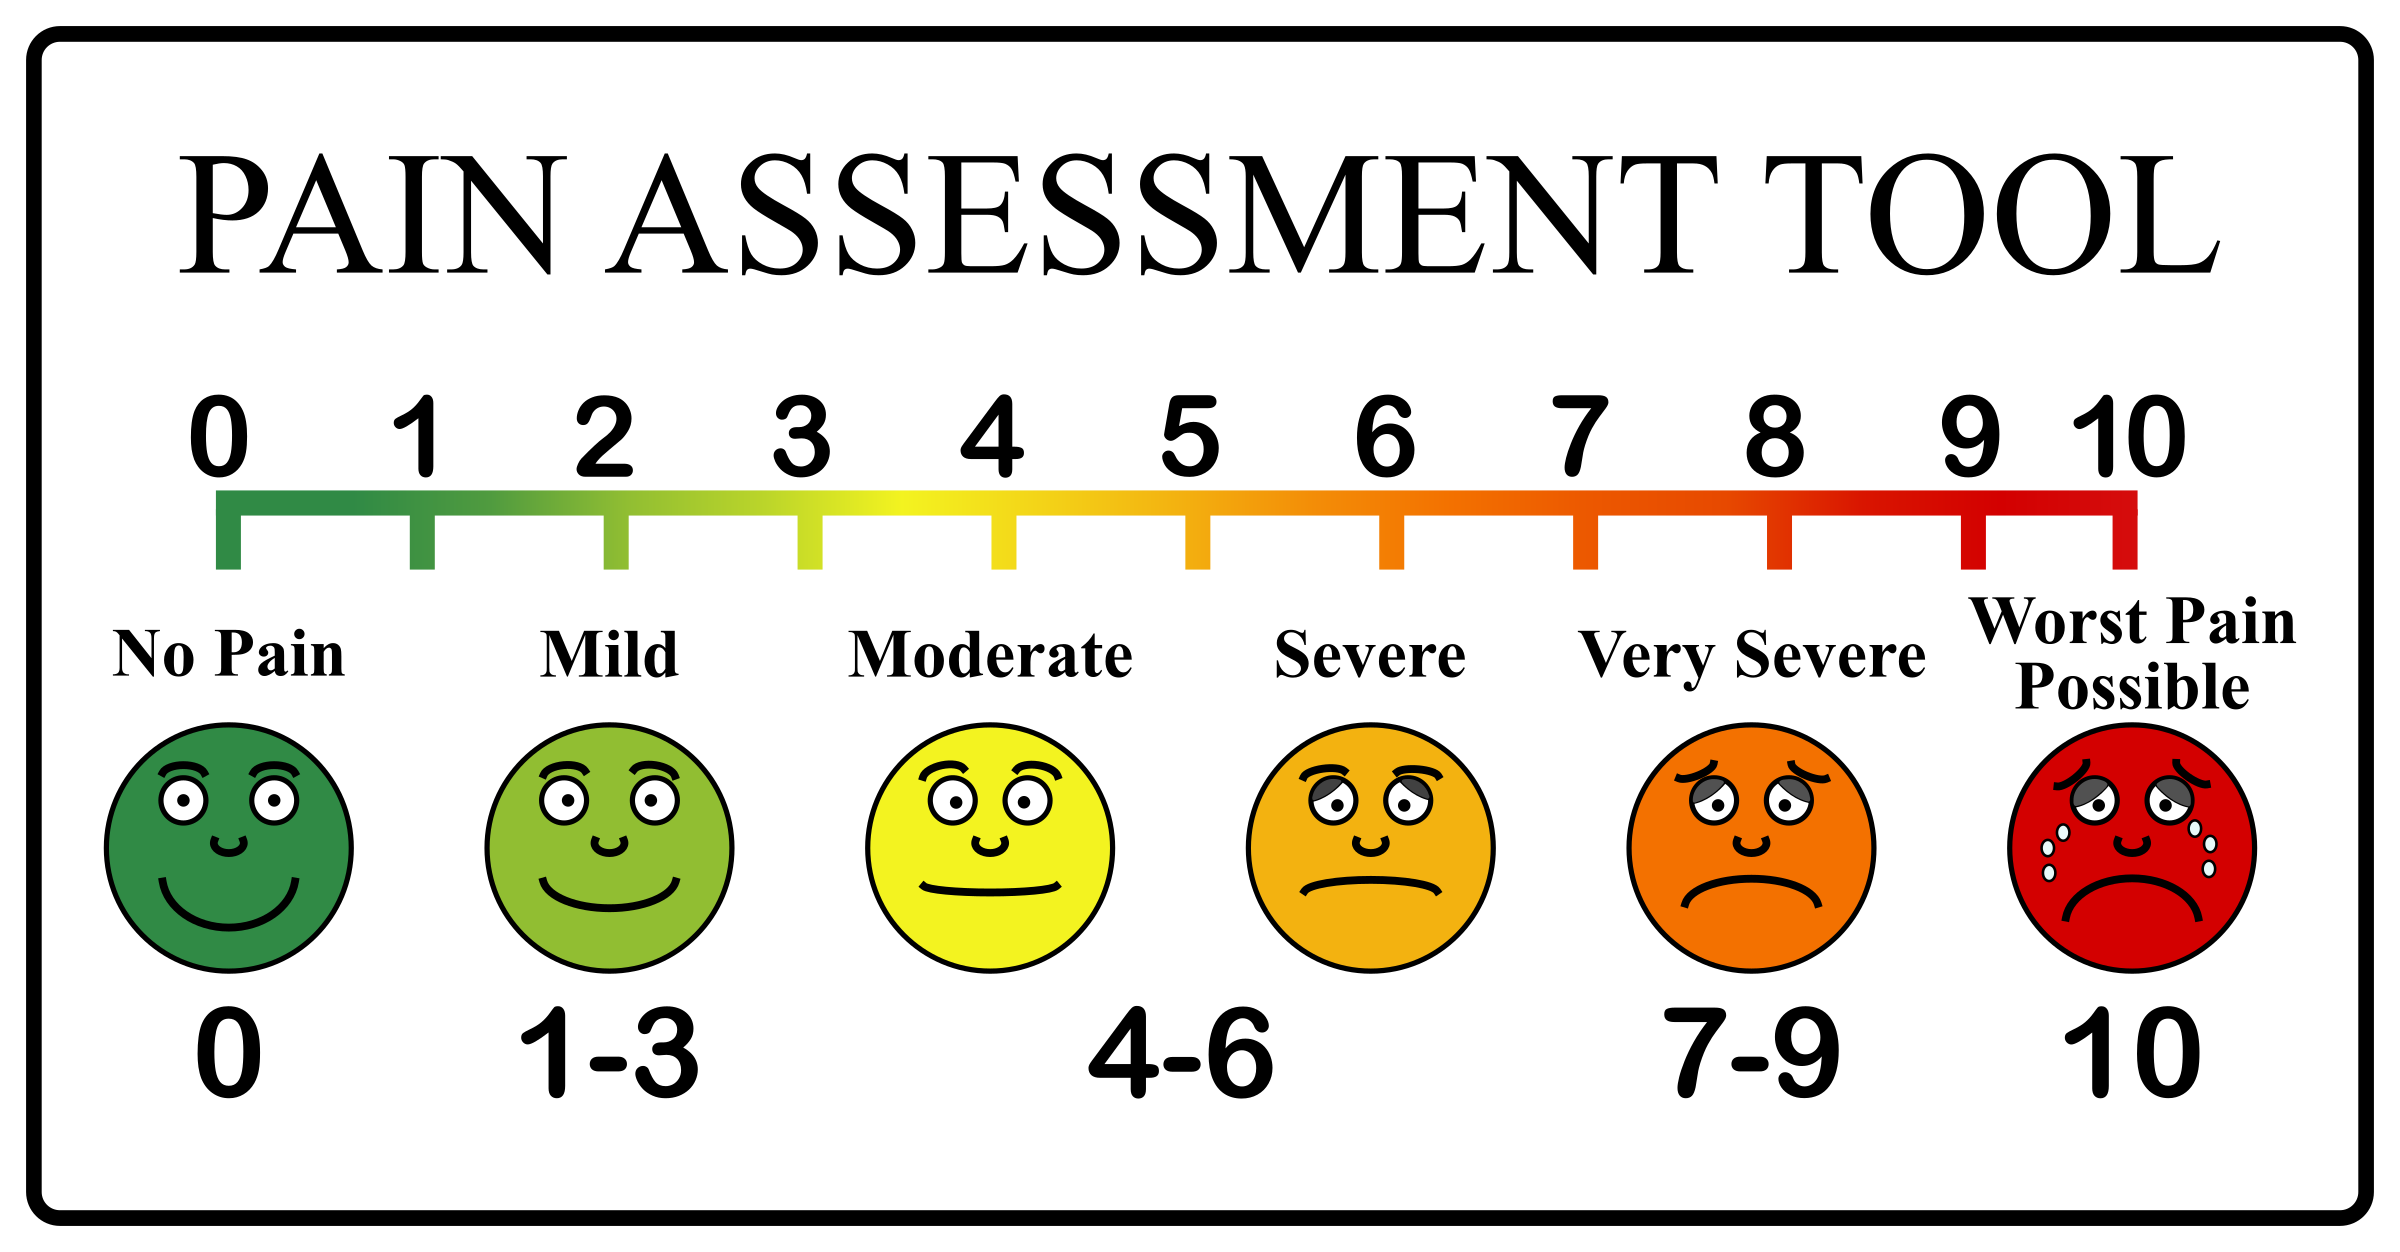 Notepad clipart cheat sheet. Pain scale